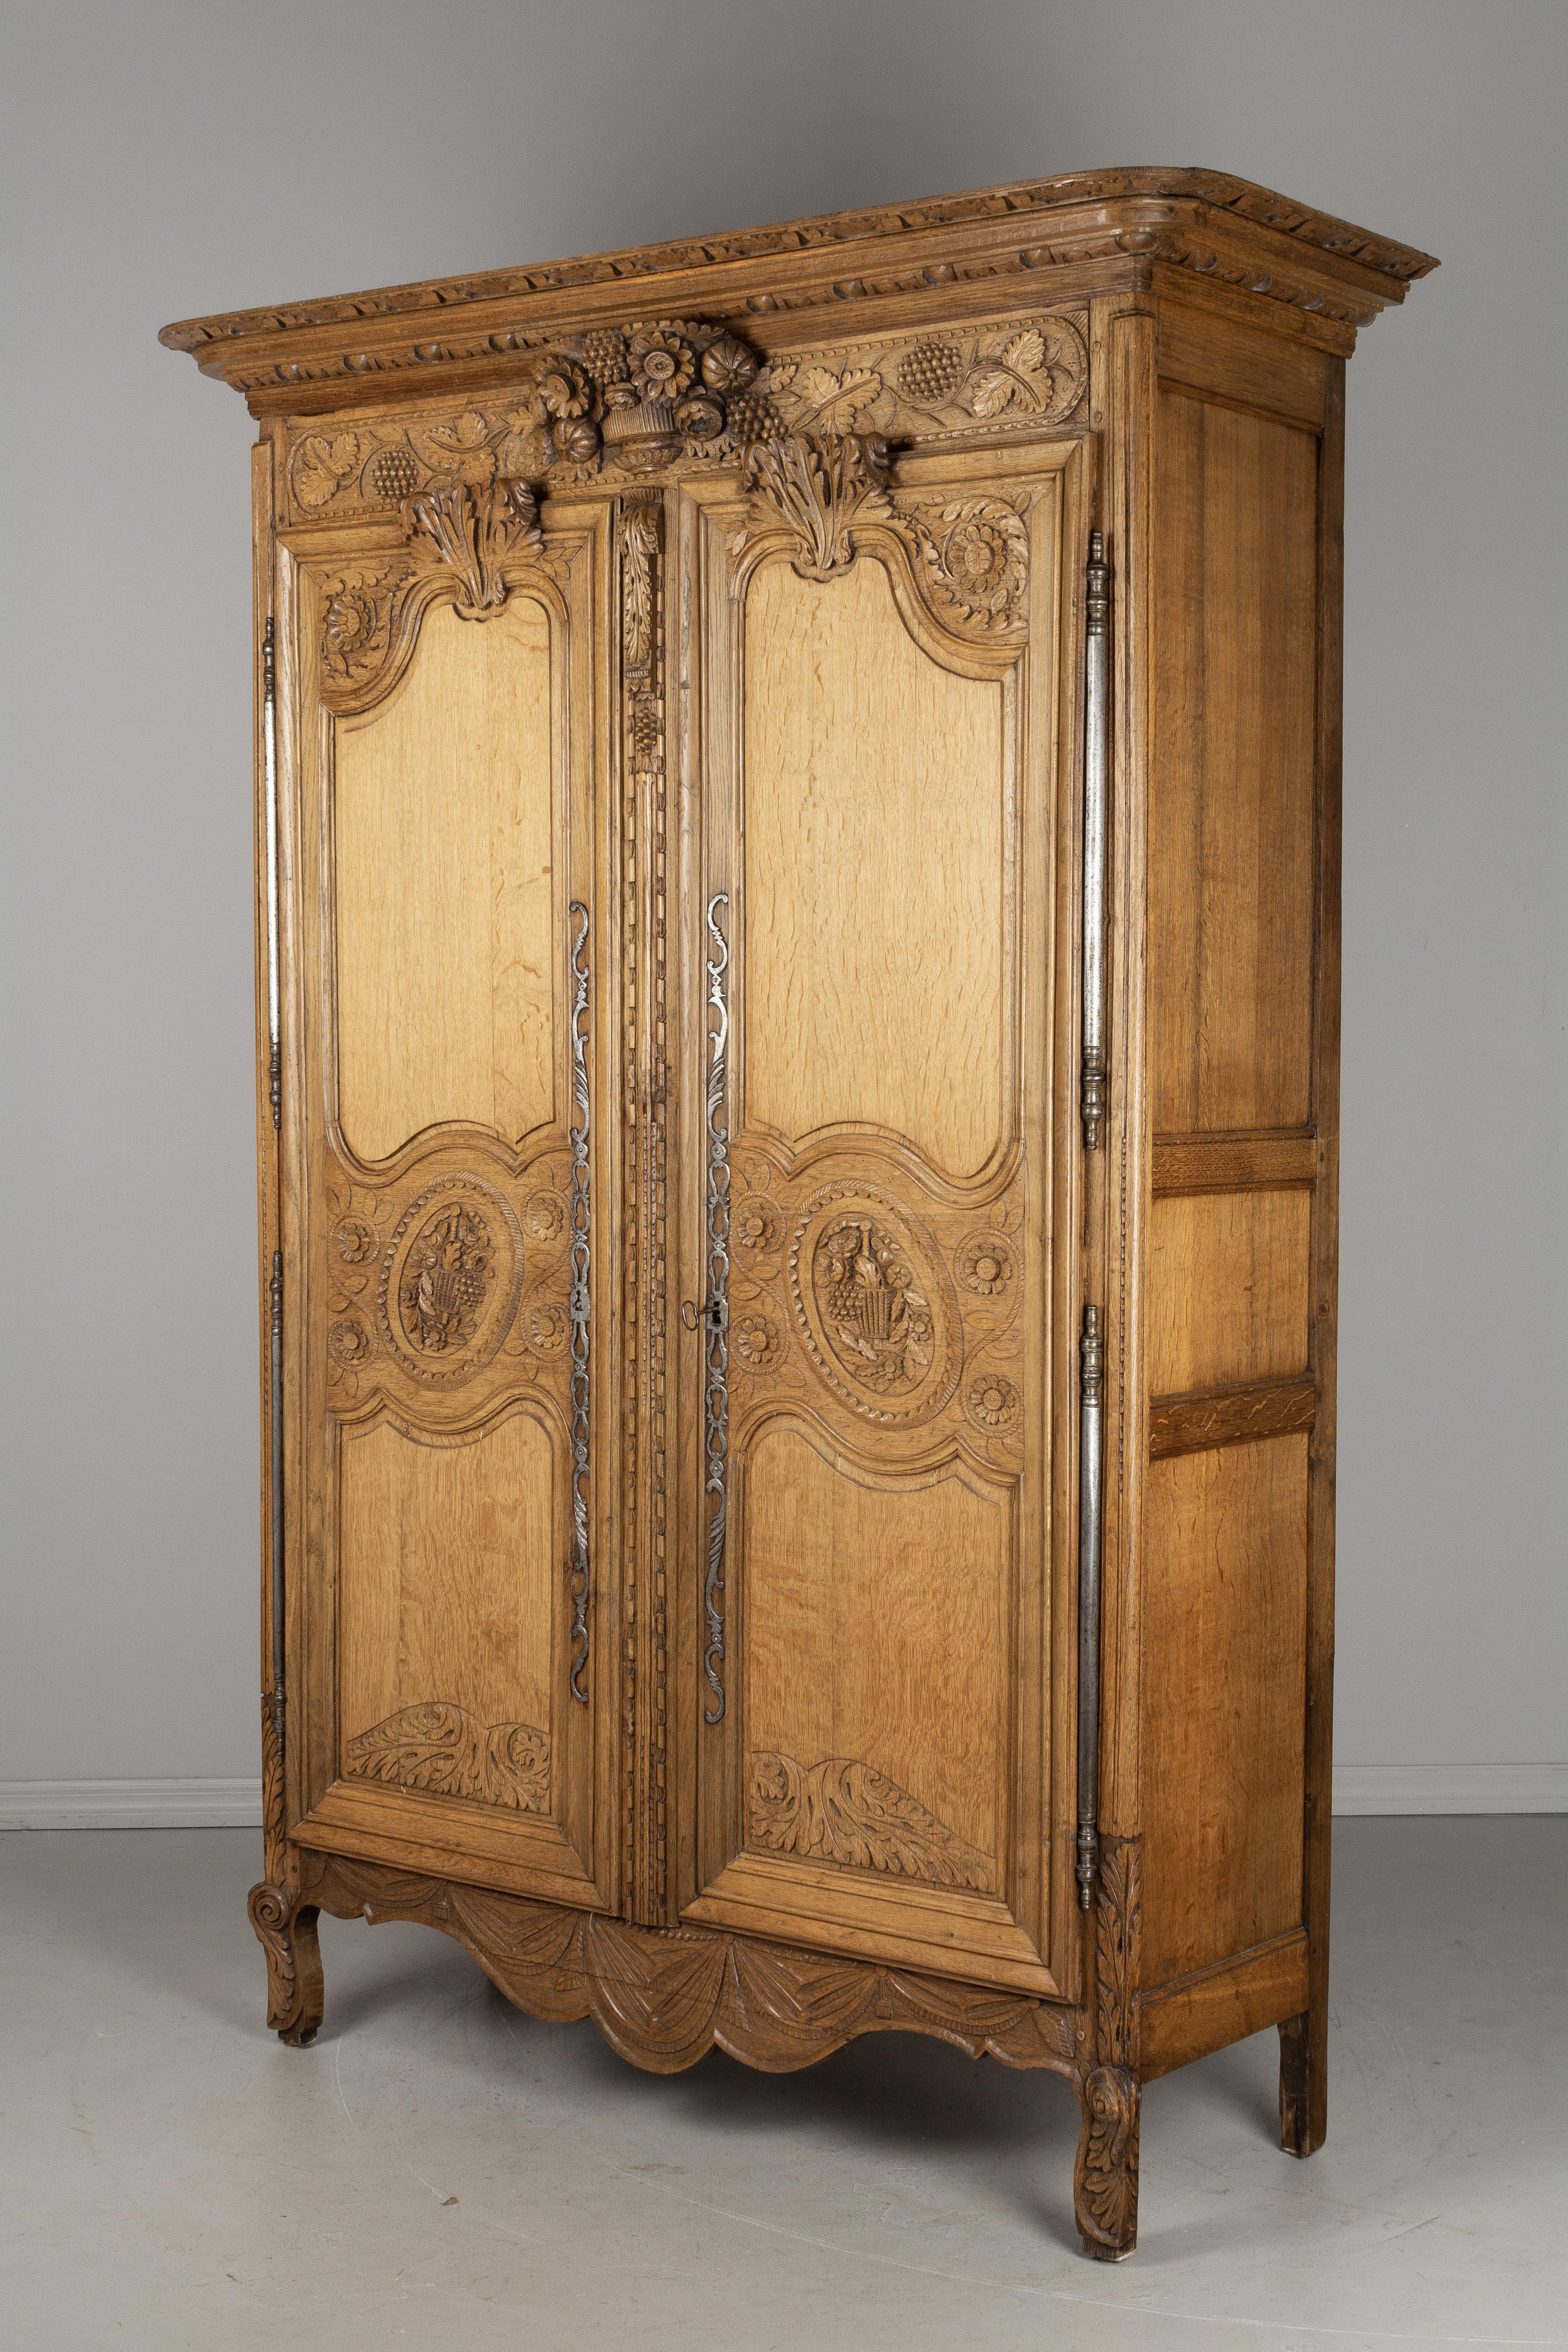 A 19th century Louis XV Country French bridal armoire from Normandy. Made of oak with fine hand carving throughout, including a three dimensional flower basket below the crown and large acanthus leaves above each door, grape vines and oval